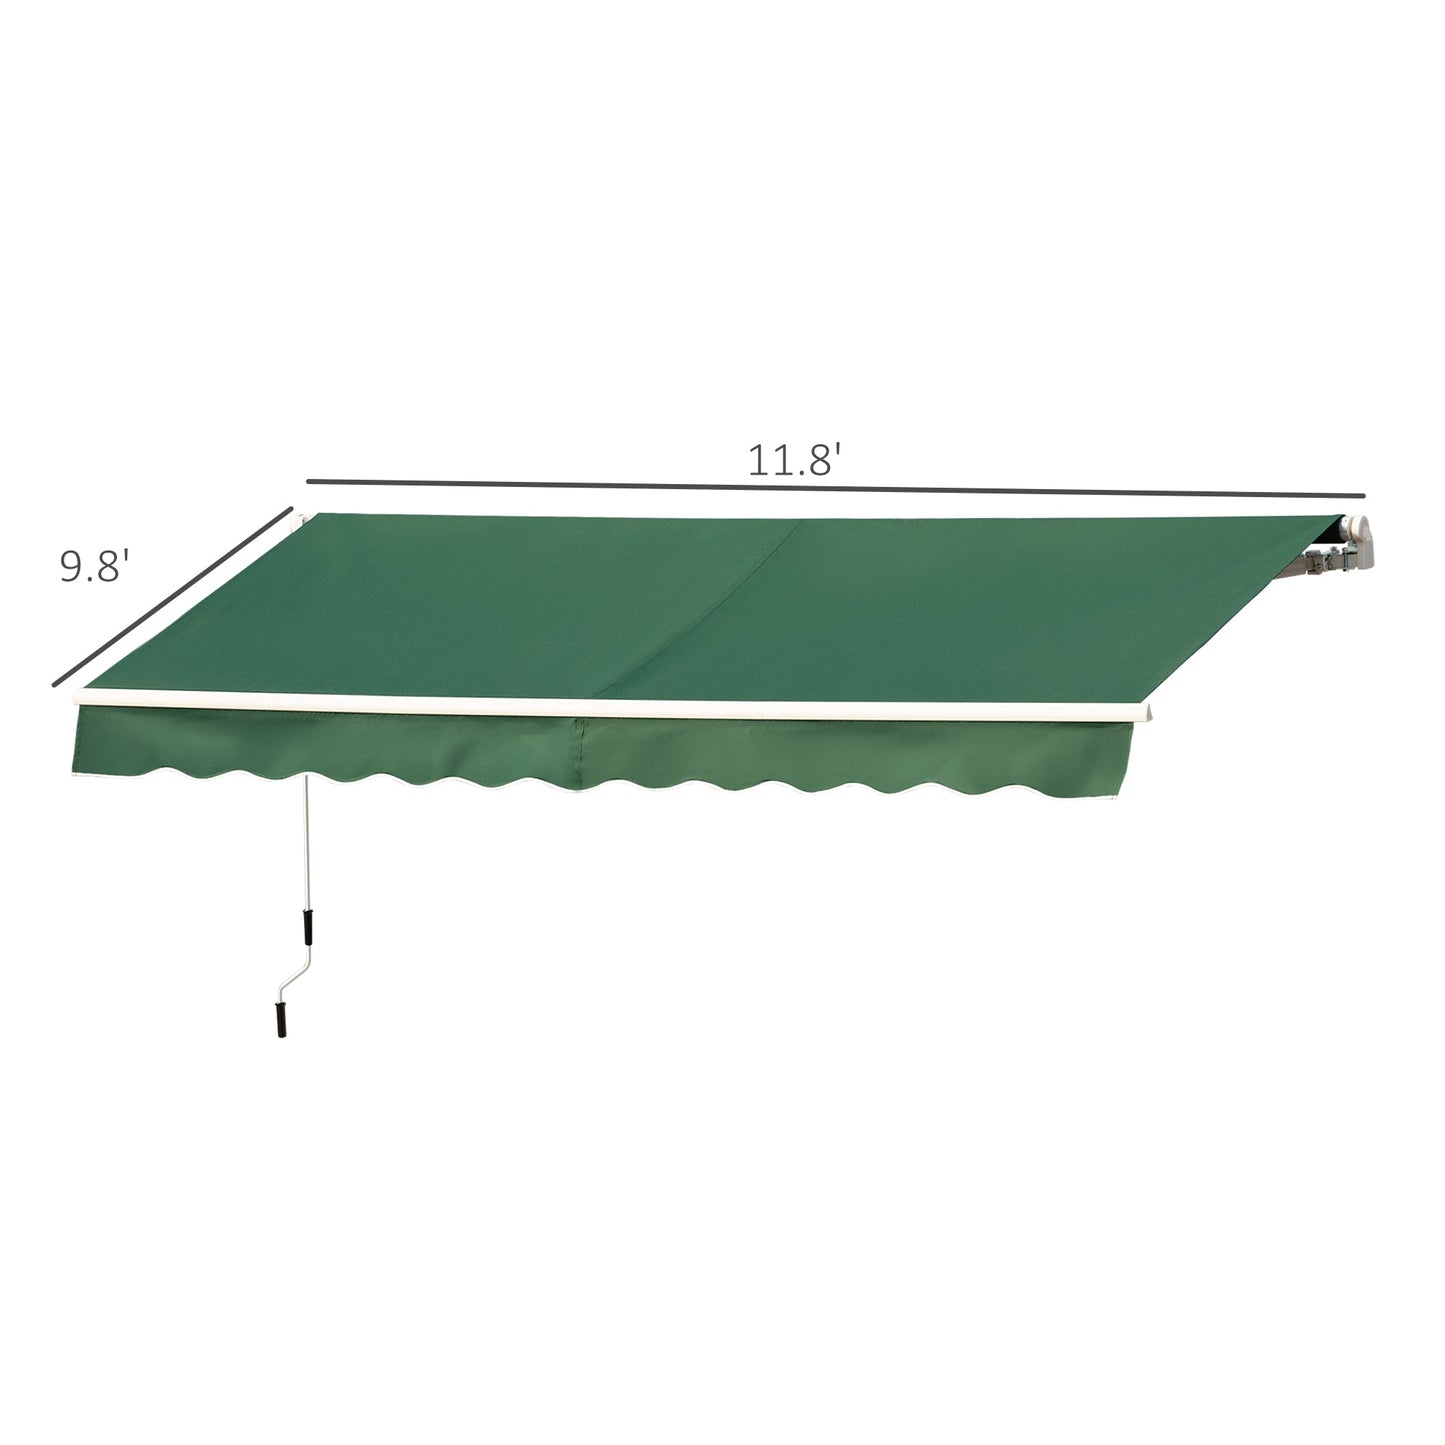 Outdoor and Garden-12' x 10' Manual Retractable Awning Outdoor Sunshade Shelter for Patio, Balcony, Yard, with Adjustable & Versatile Design, Green - Outdoor Style Company